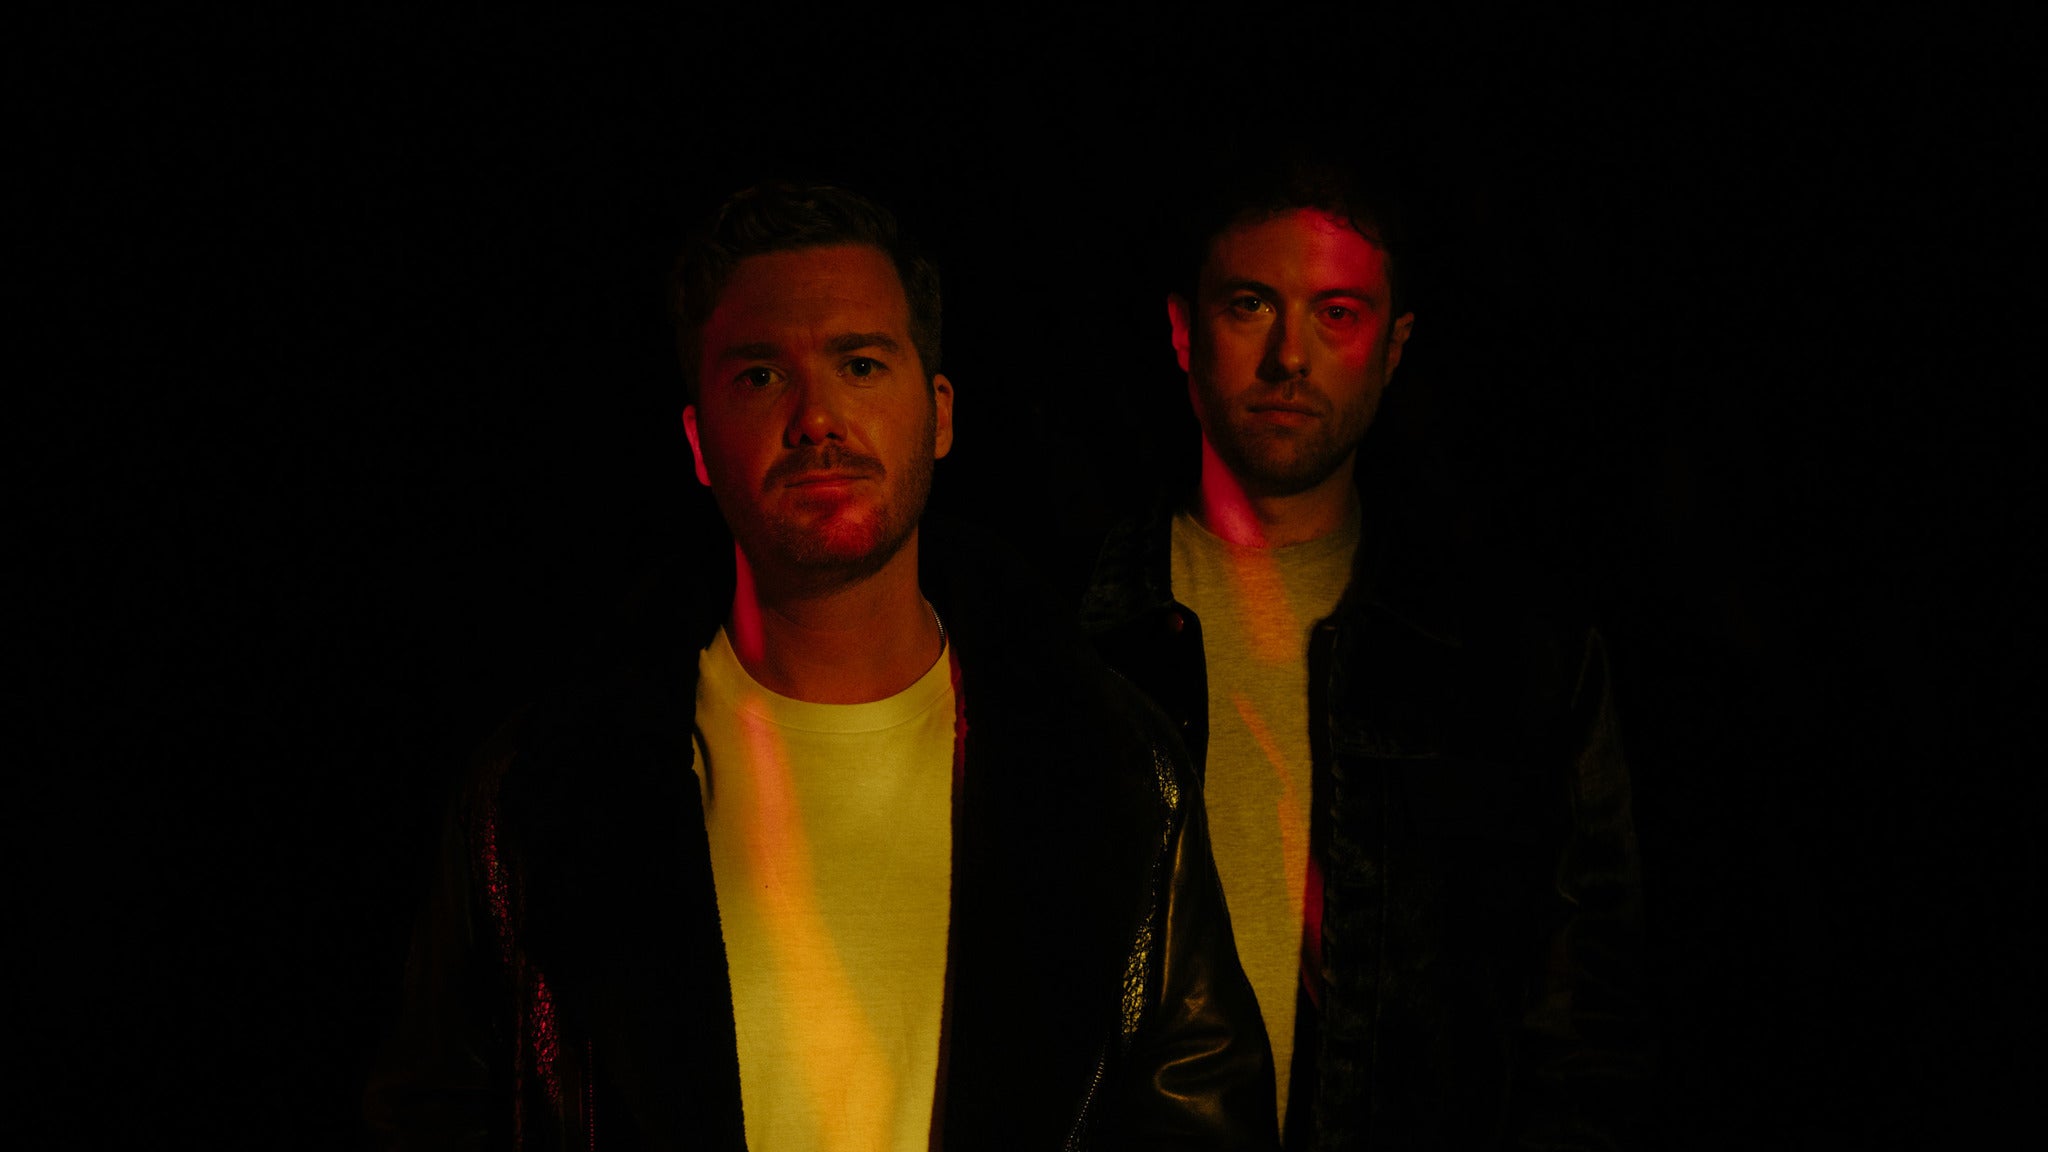 Image used with permission from Ticketmaster | Gorgon City tickets